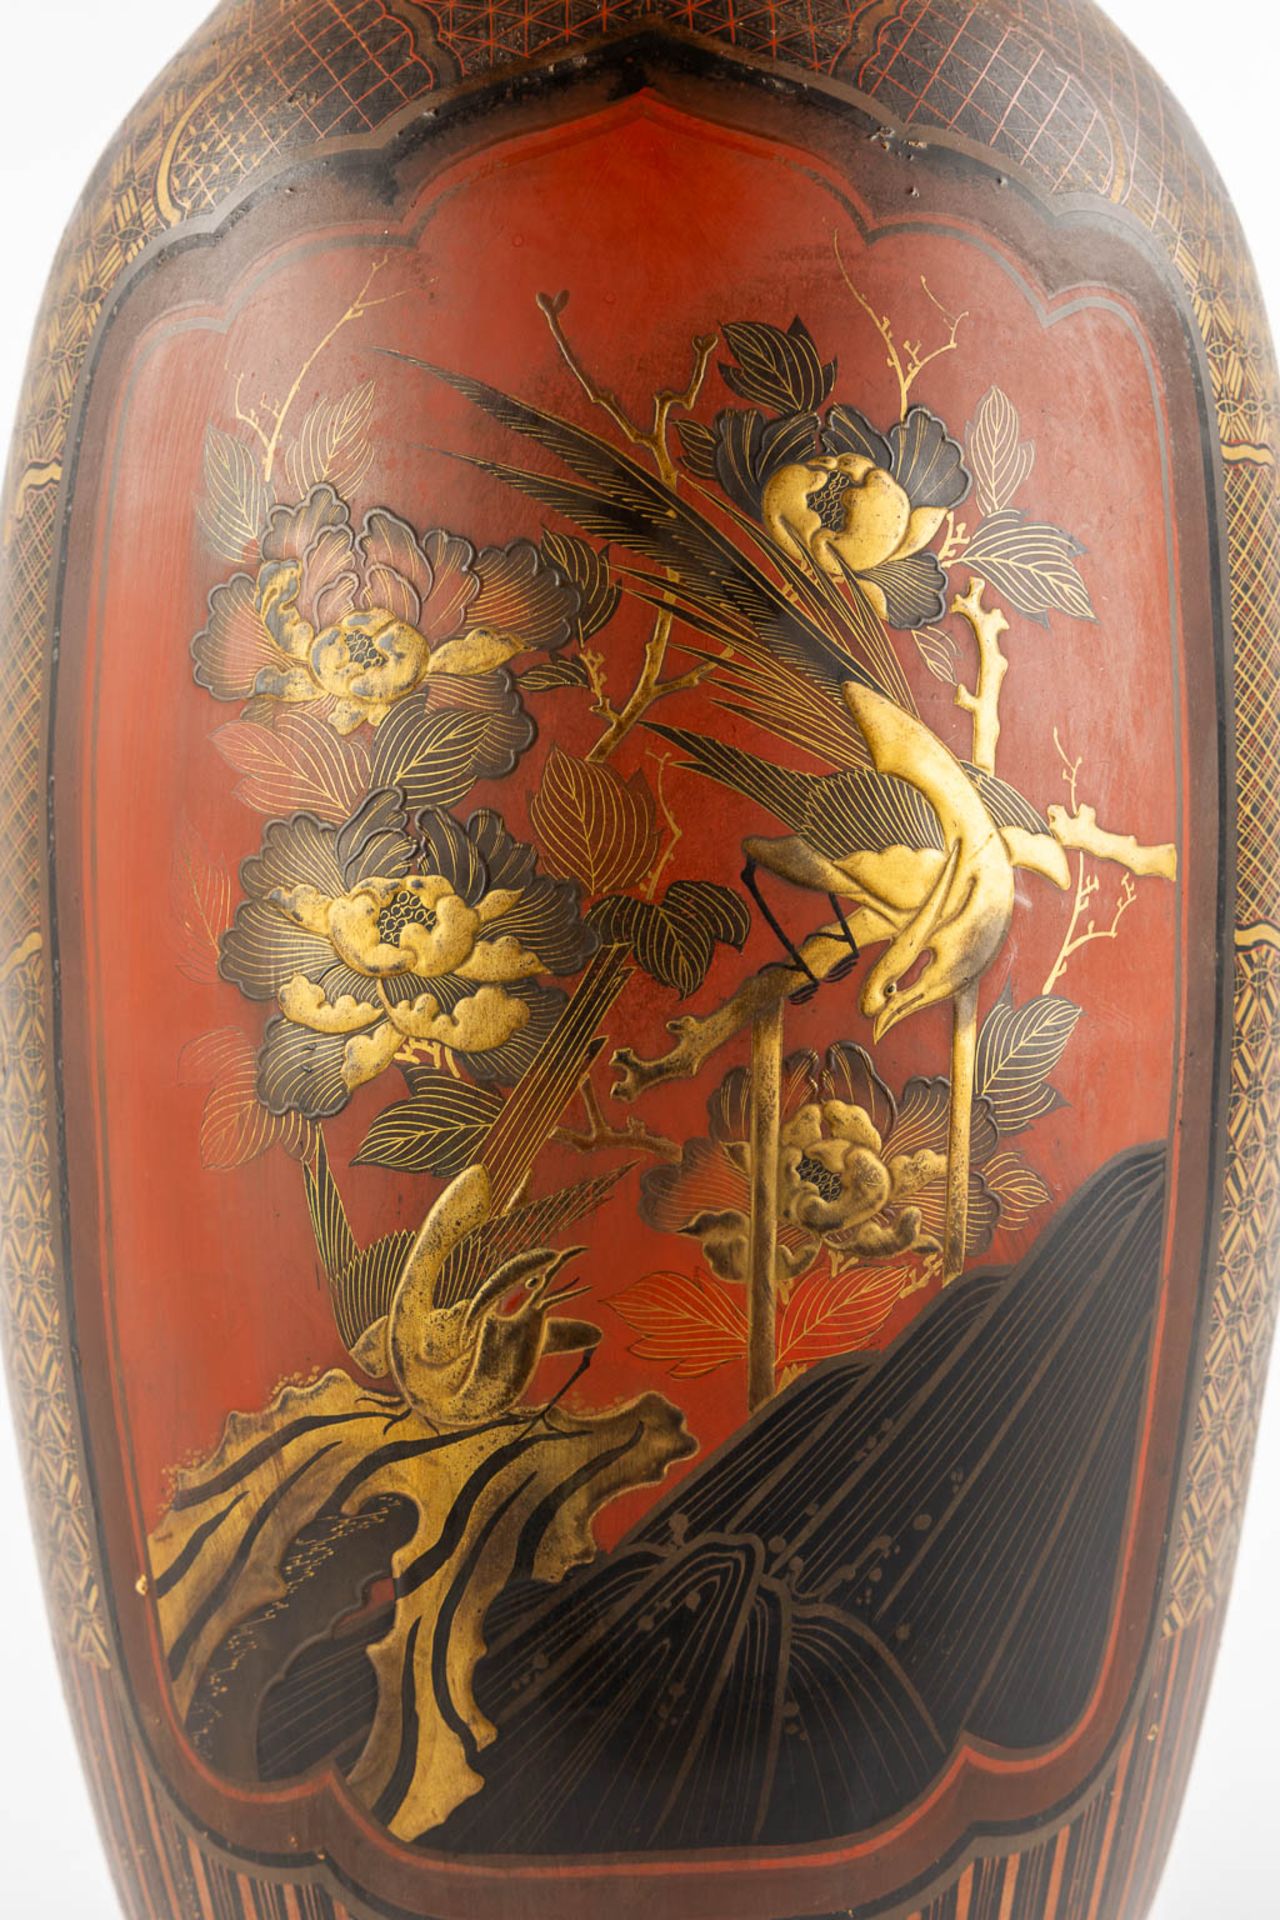 A Japanese porcelain vase, finished with red and gold lacquer. Meij period. (H:61 x D:27 cm) - Bild 11 aus 14